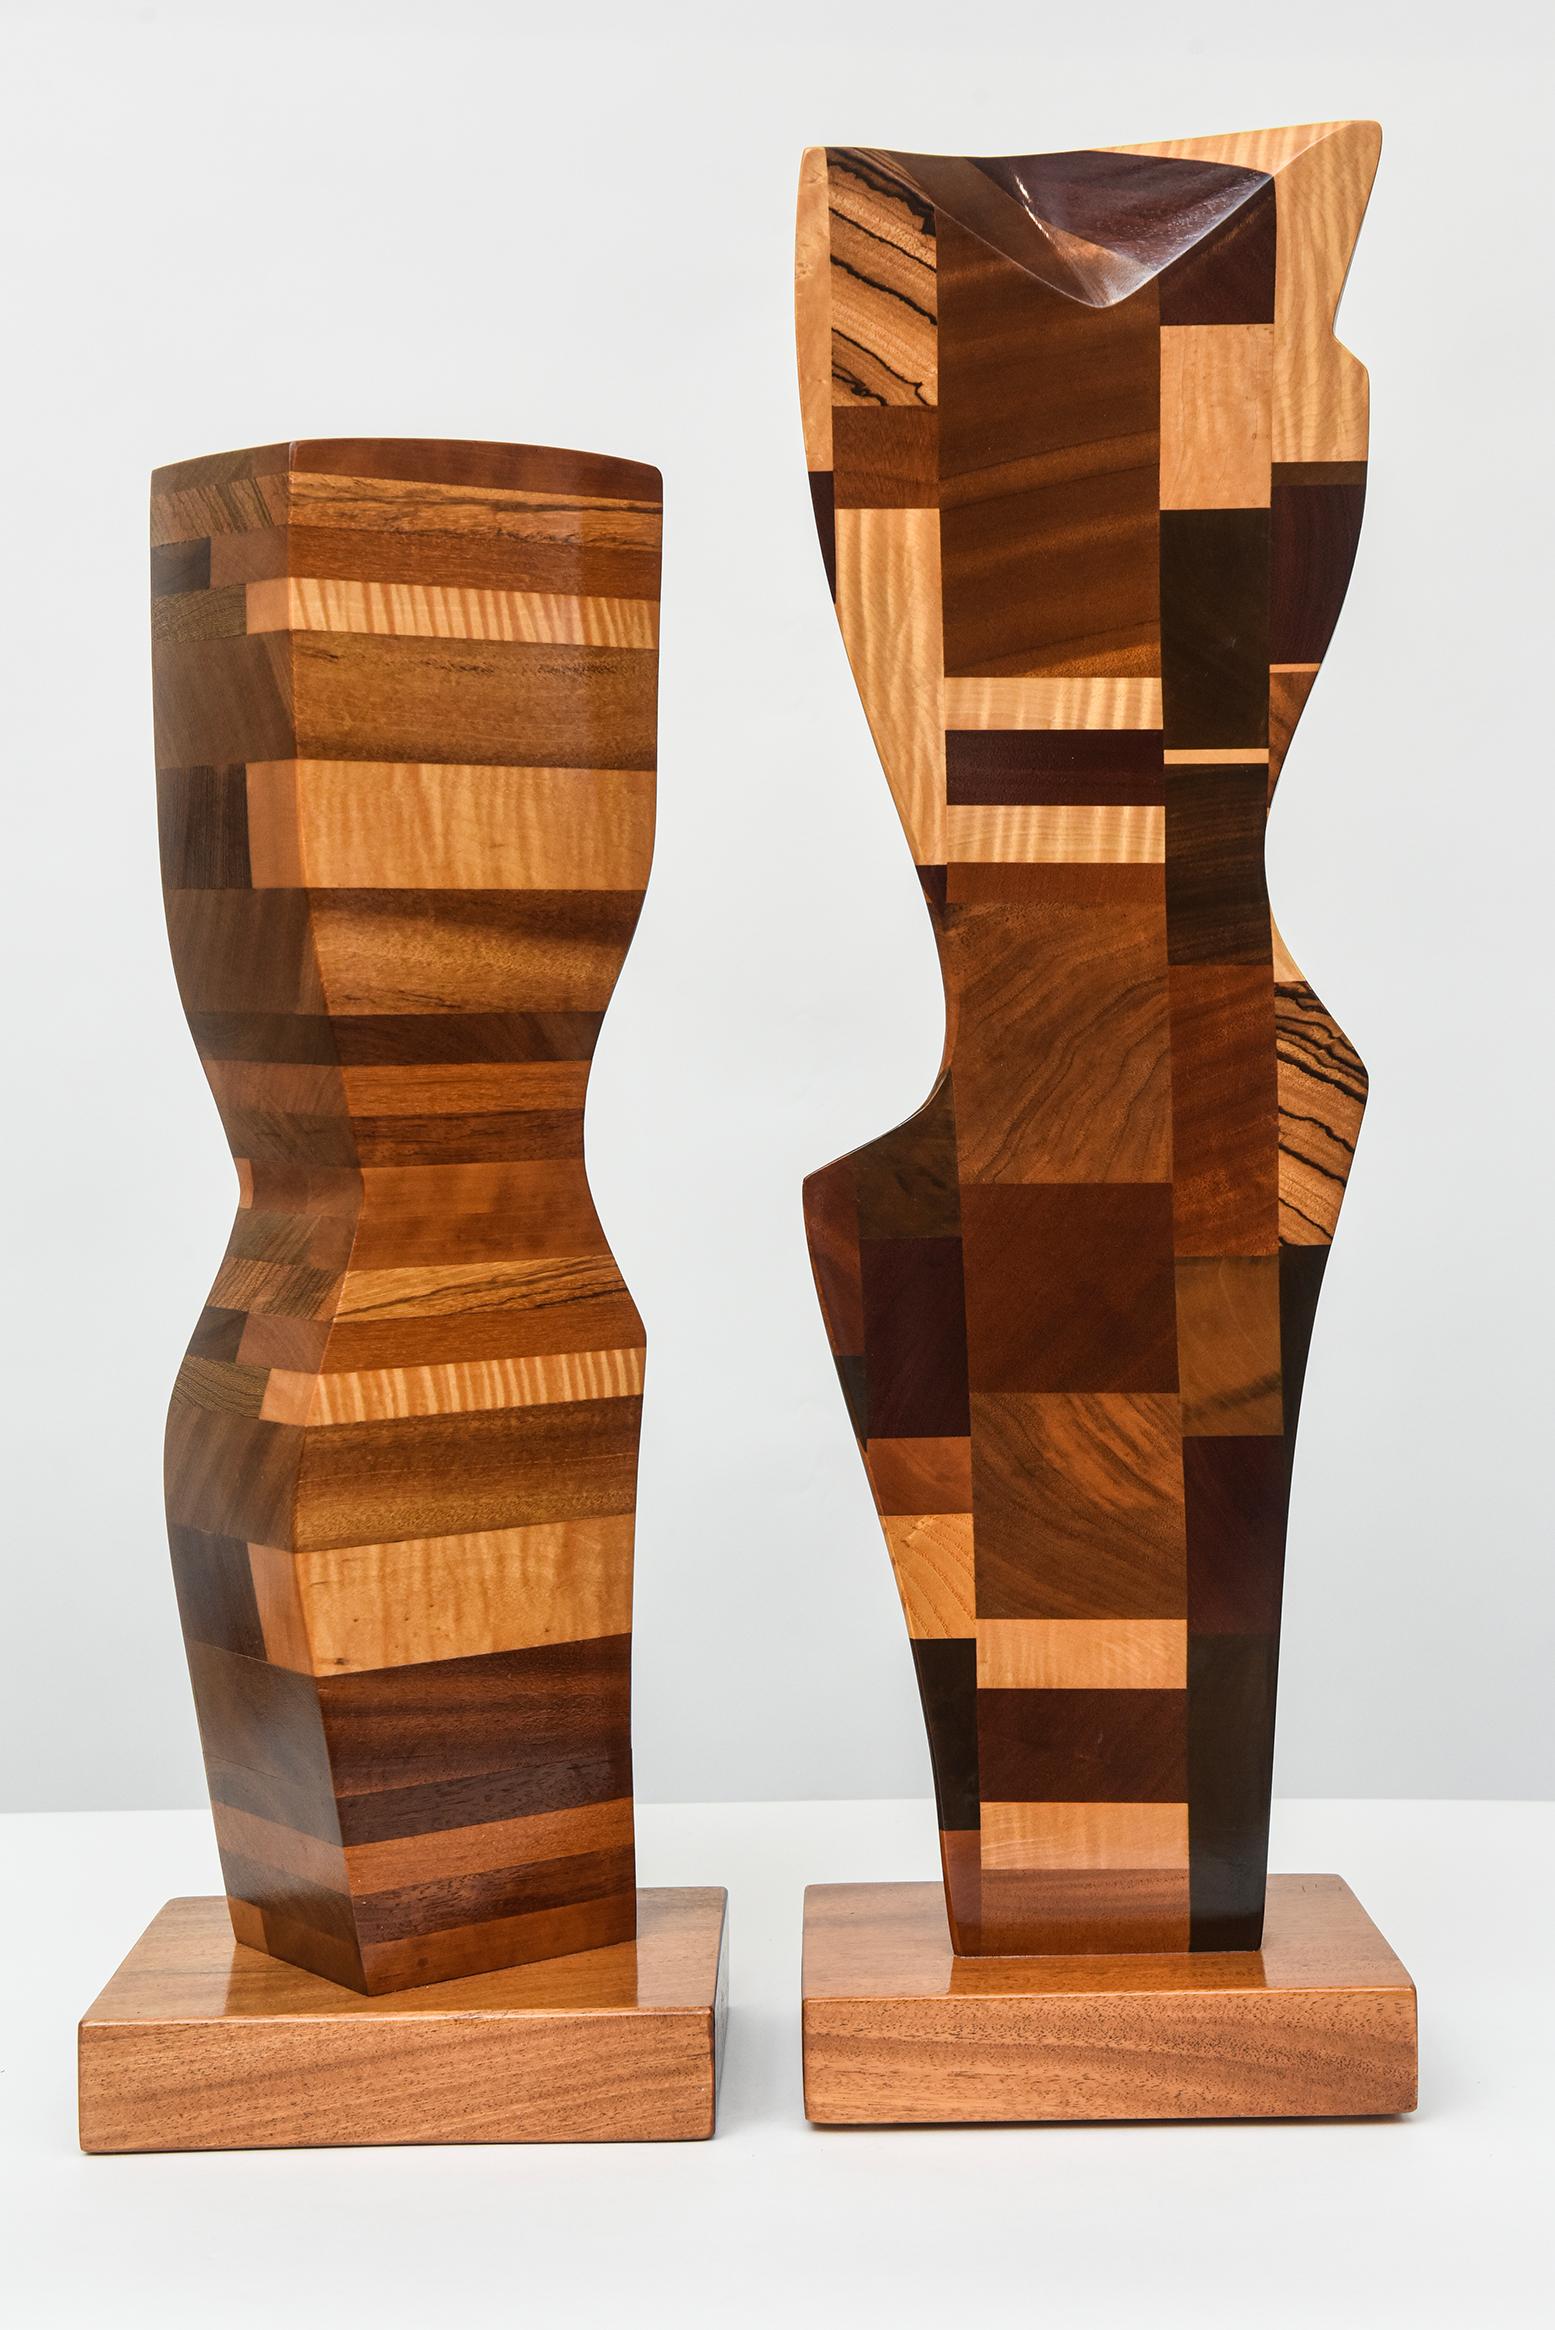 American Two Modern Abstract Mixed Wood Studio Sculptures by Paul LaMontagne, C. 1980 For Sale